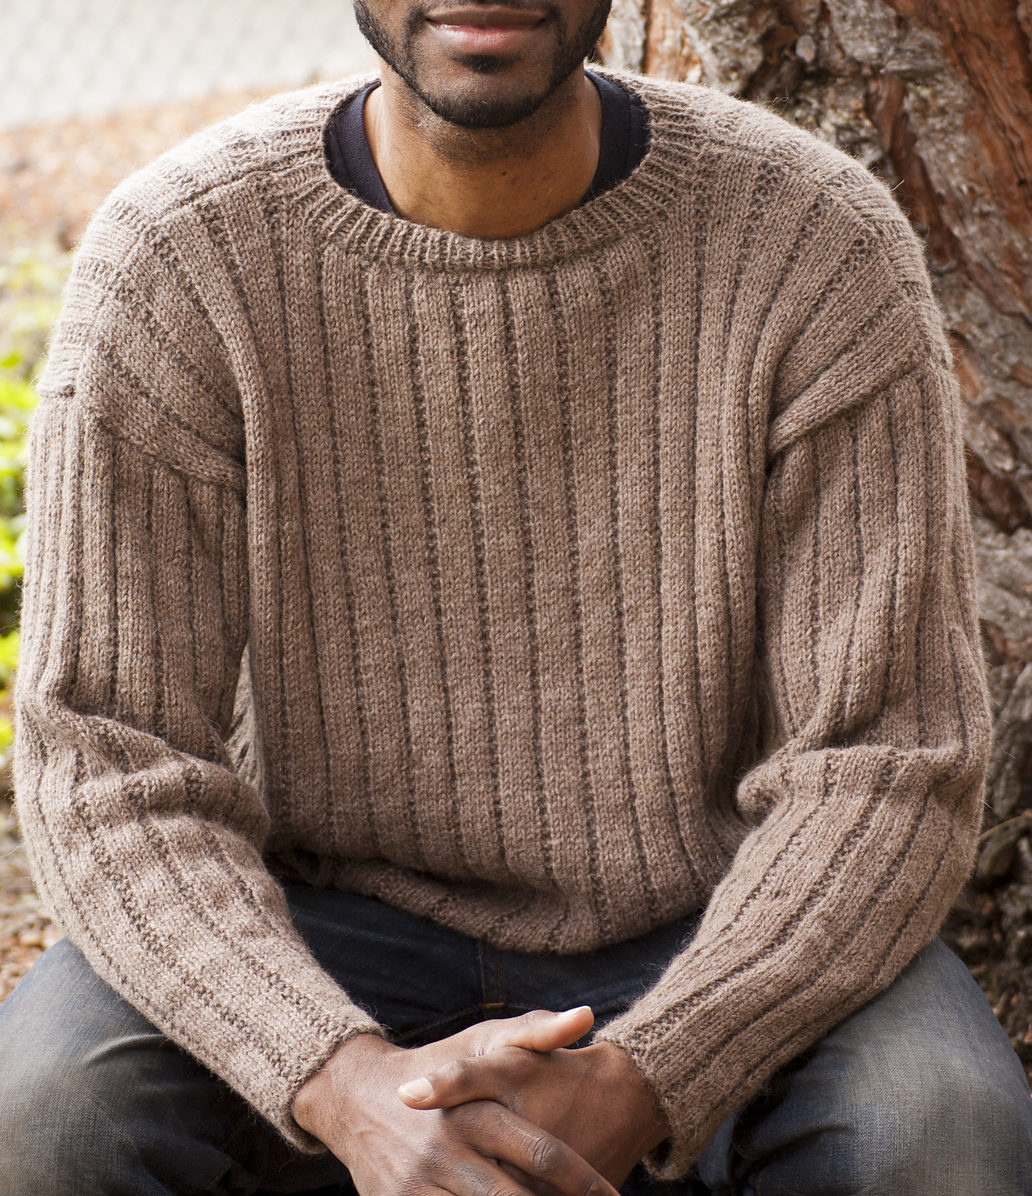 Men’s Sweater Knitting Patterns In the Loop Knitting